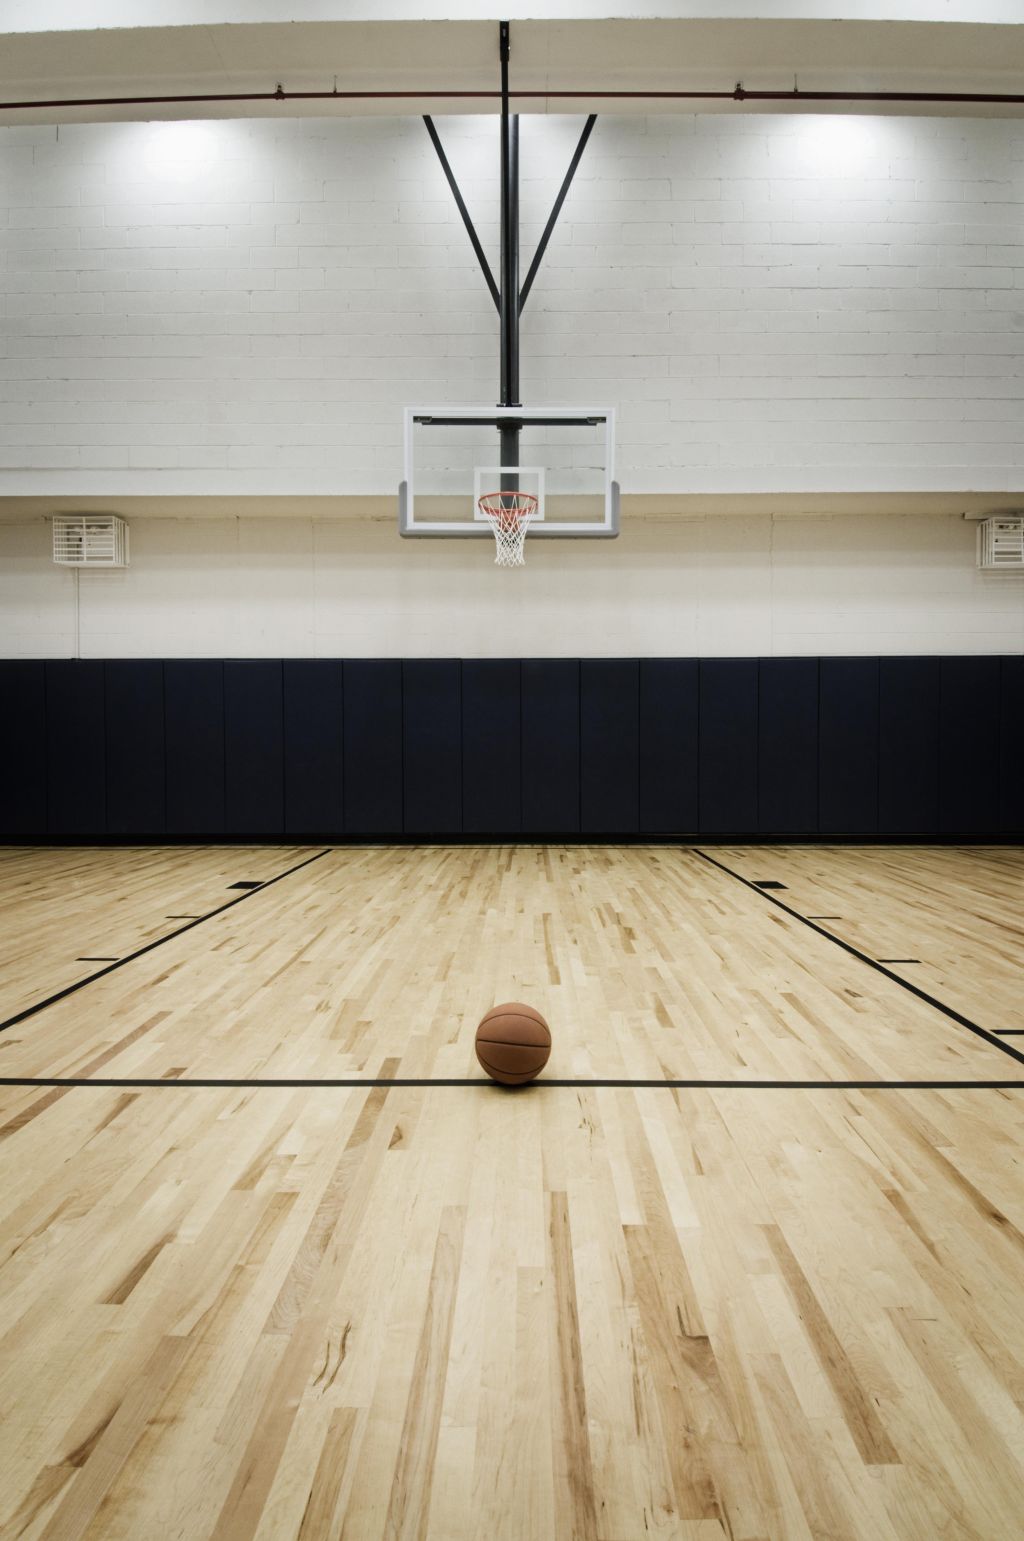 A basketball sits on the free throw line.